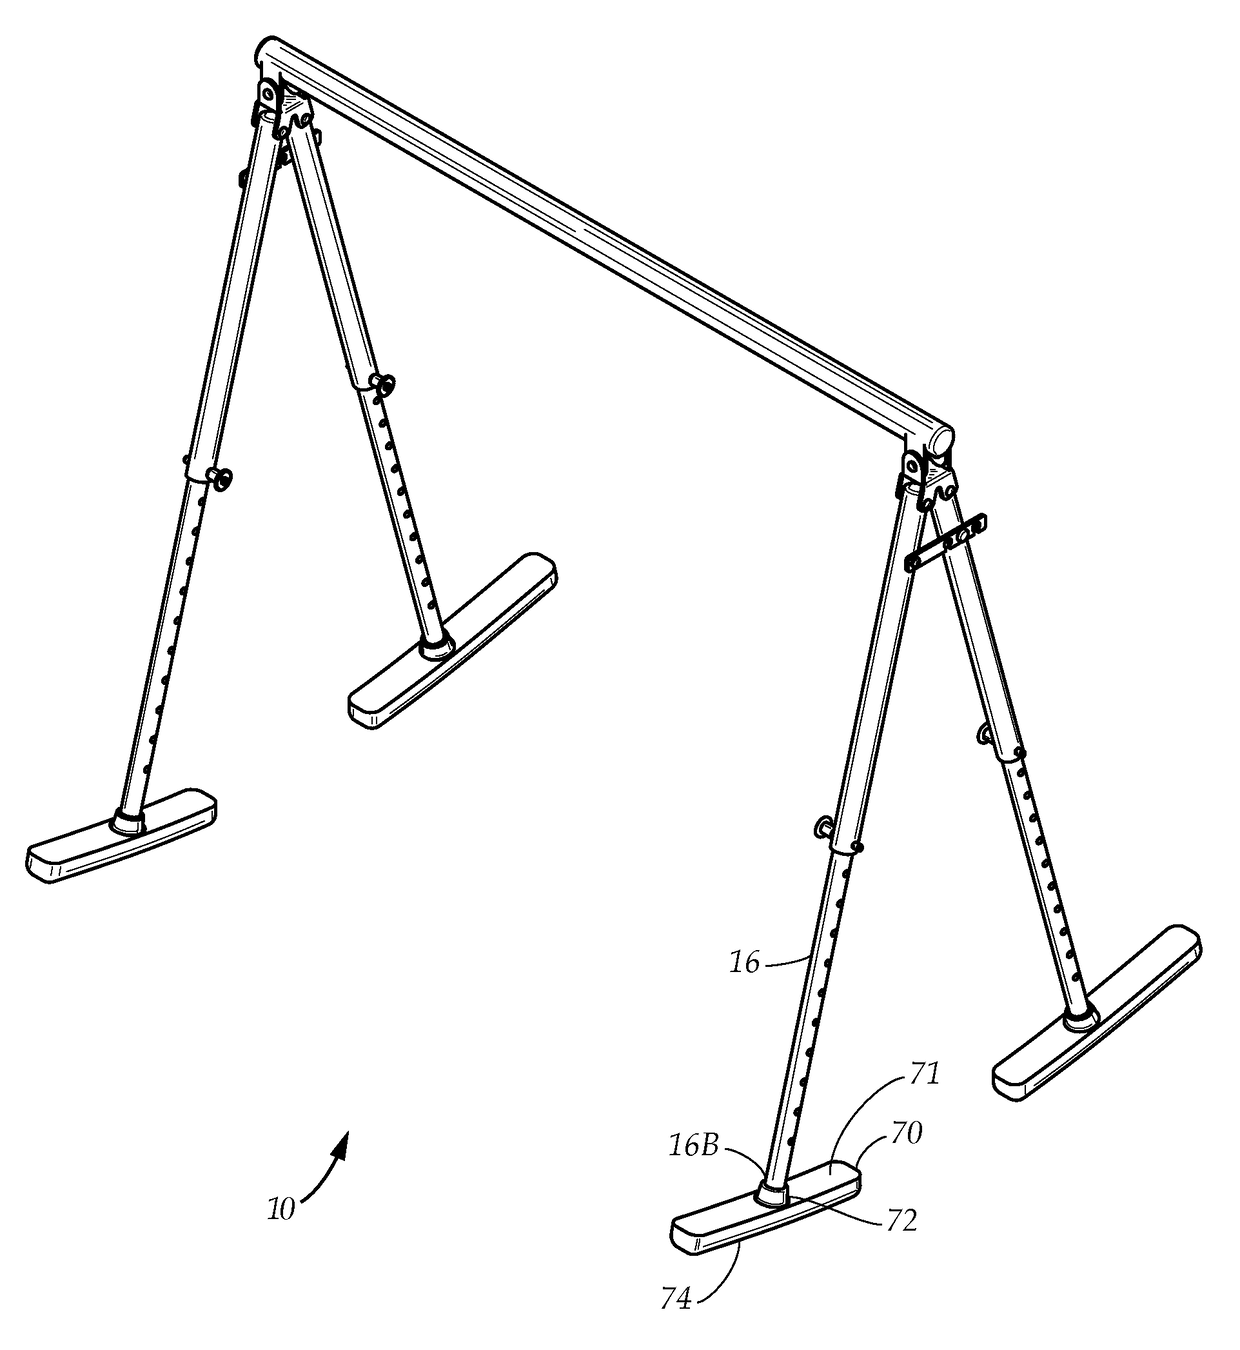 Adjustable pull-up bar and core exerciser